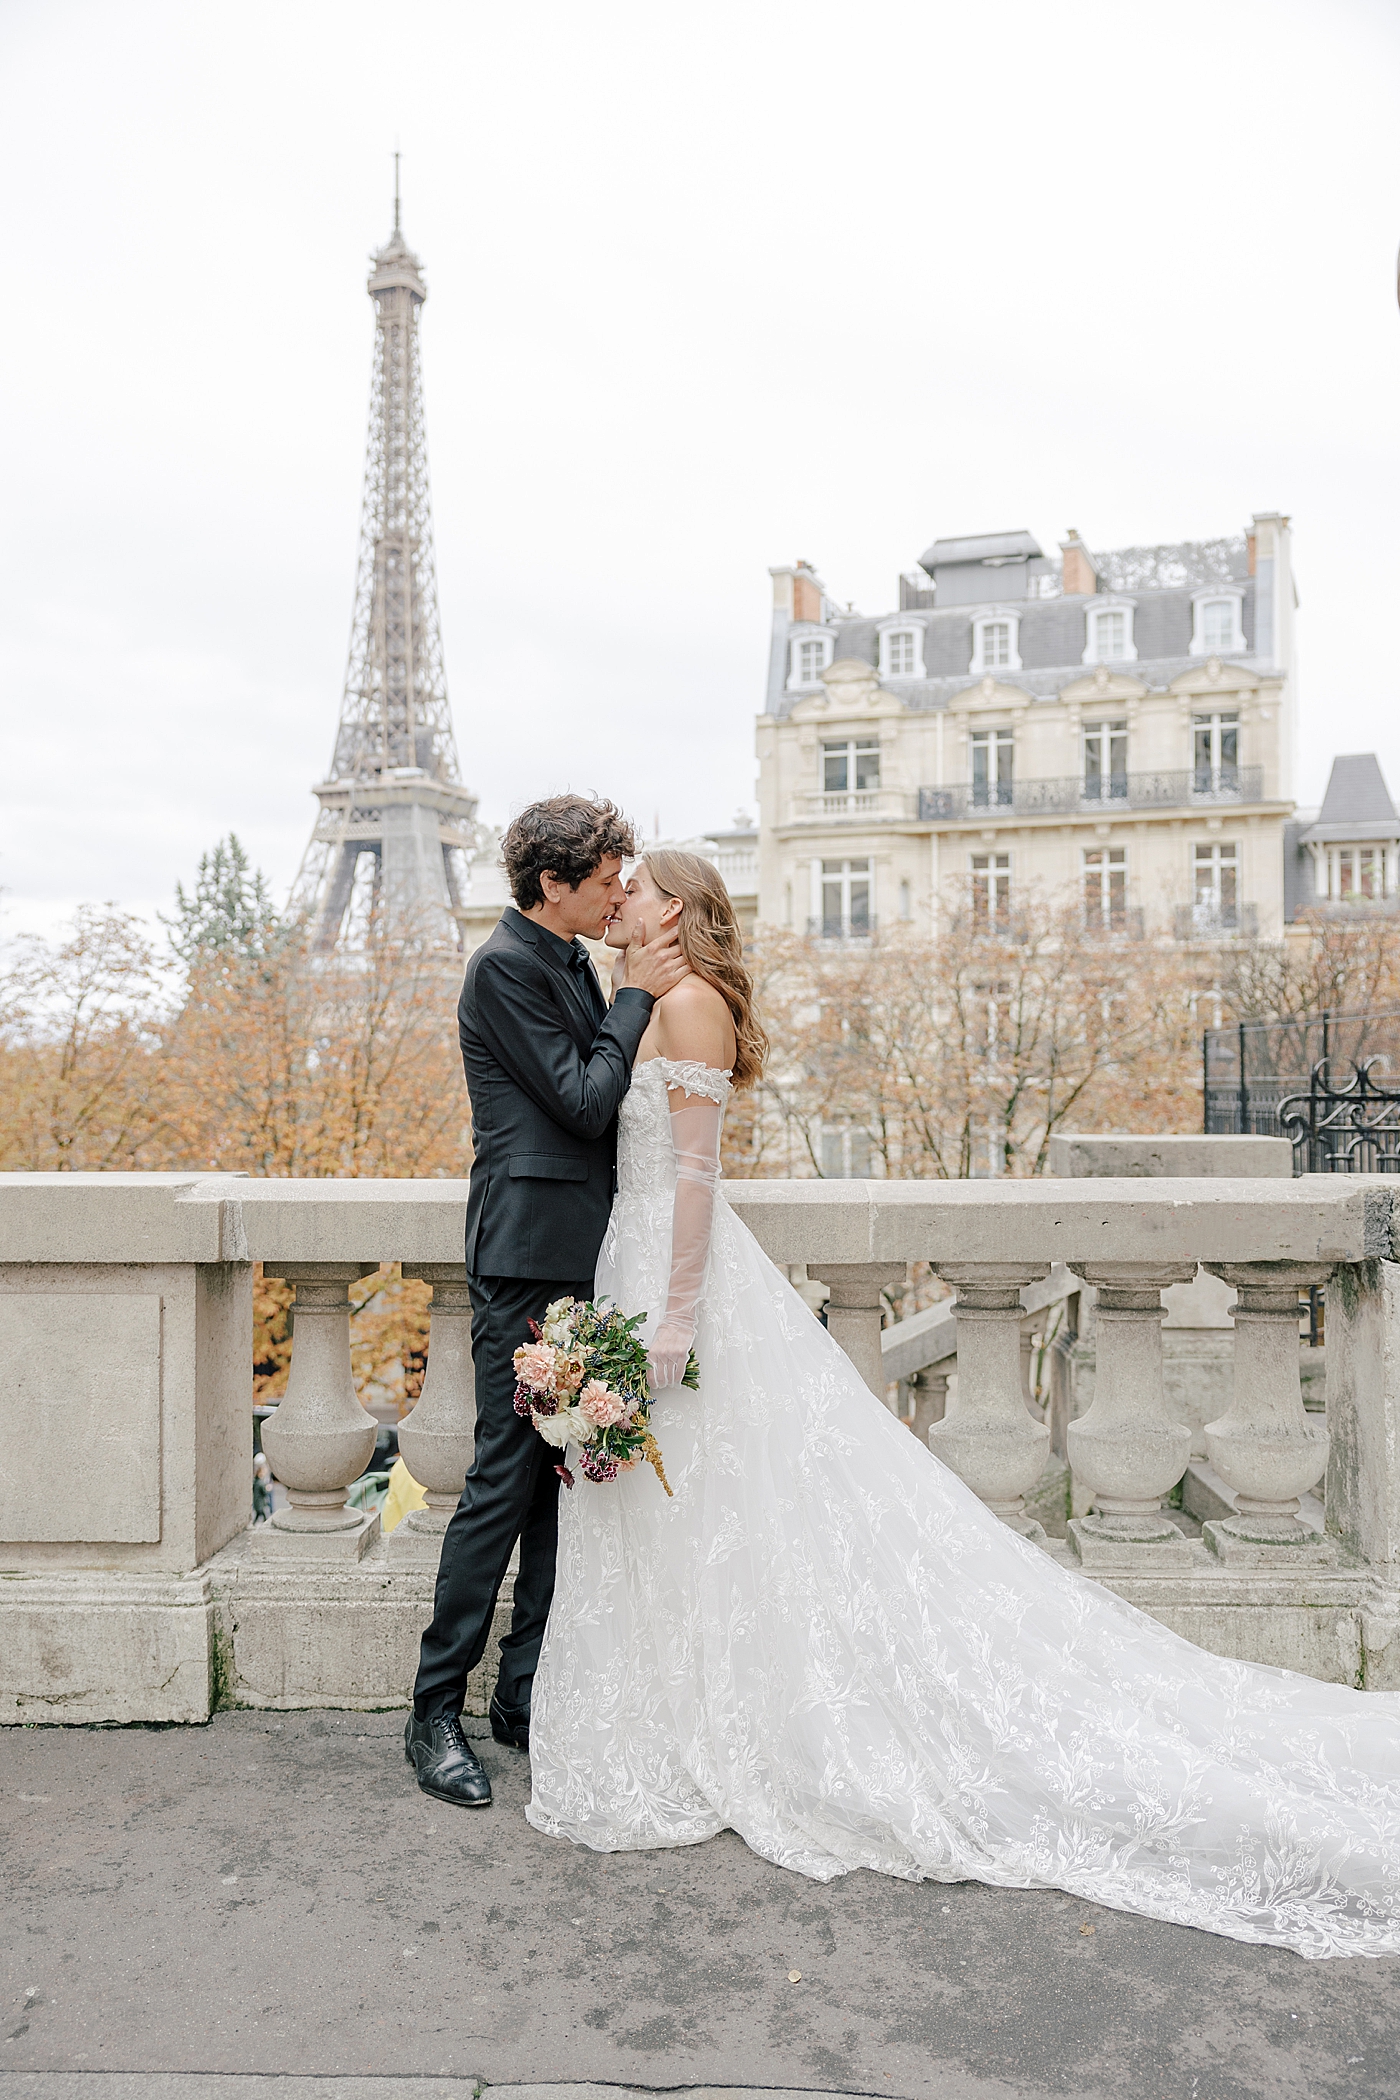 Image of a bride and groom embracing and kissing in Paris with the Eiffel tower in the background | Image by Hope Helmuth Photography